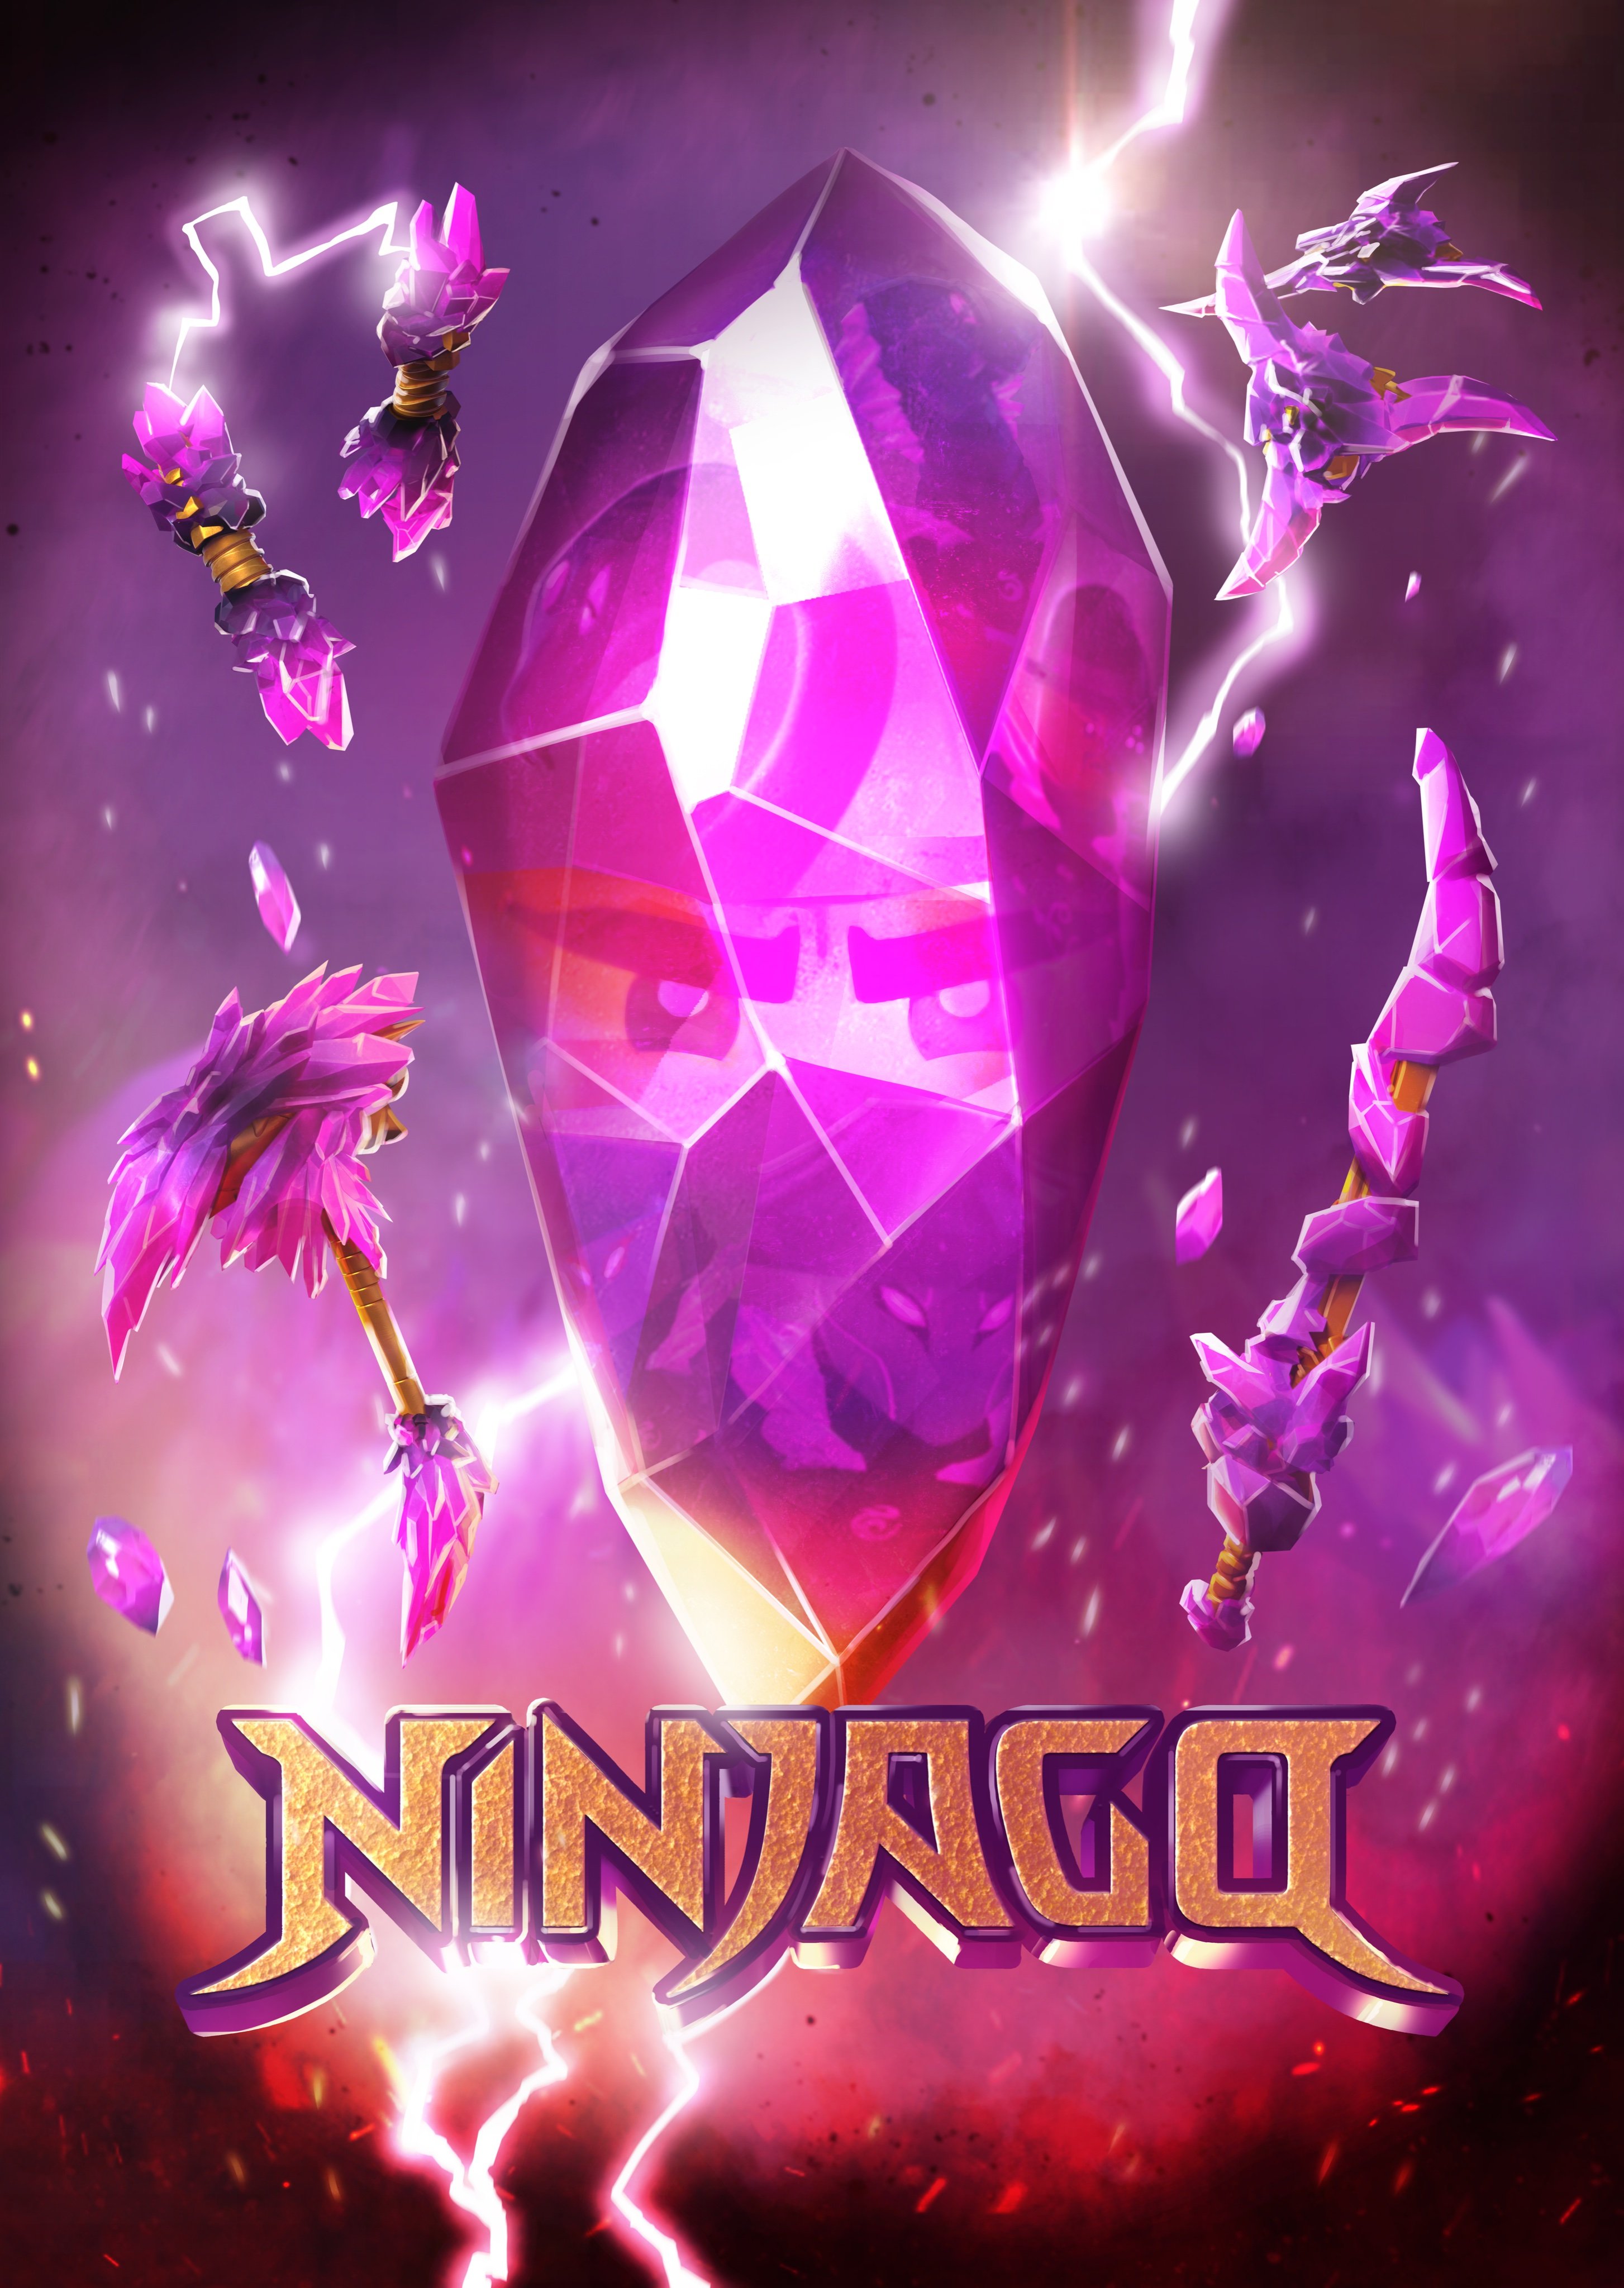 LEGO no Twitter The wait is almost over The ninja will soon face their  biggest challenge ever in the final showdown against The Crystal King NINJAGO  Crystalized Part II coming soon 